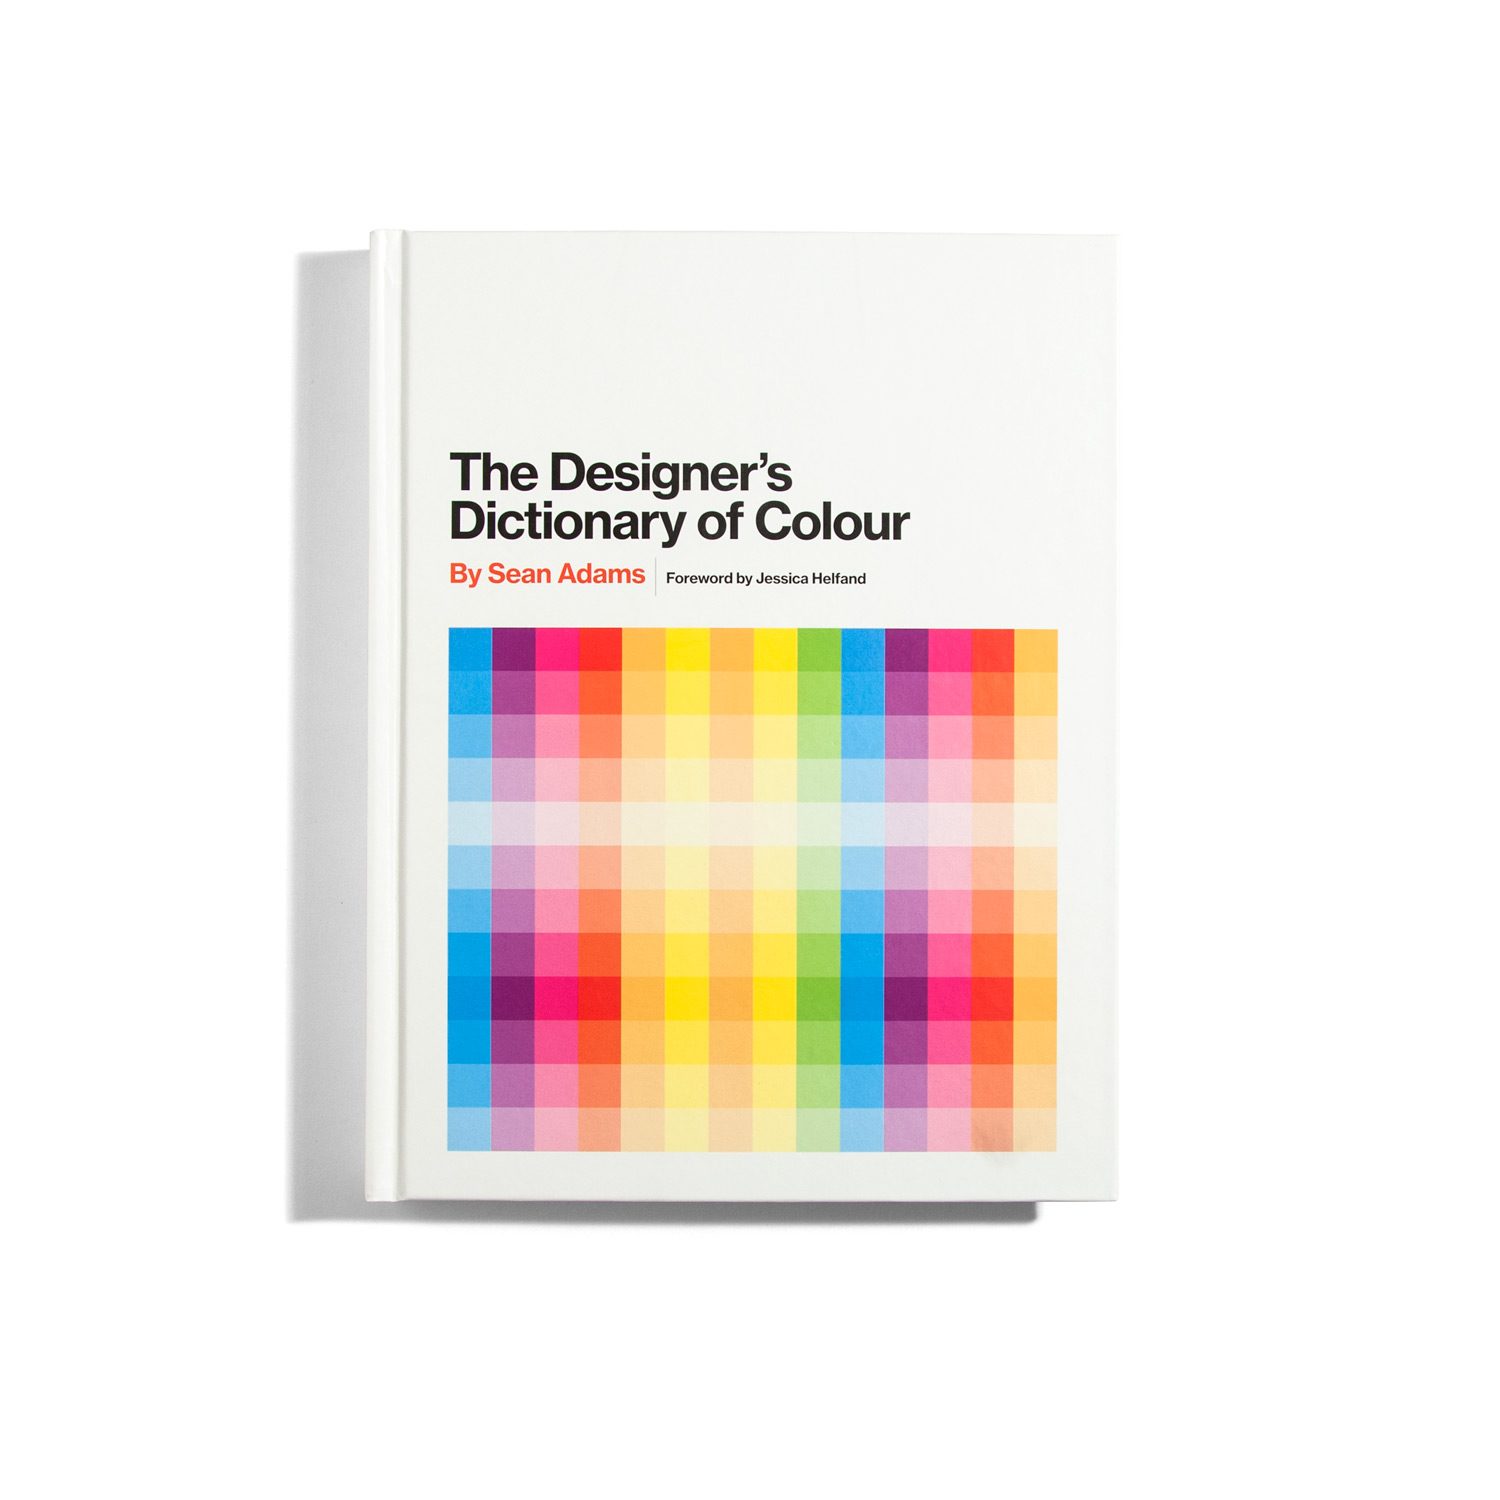 The Designers Dictionary of Colour